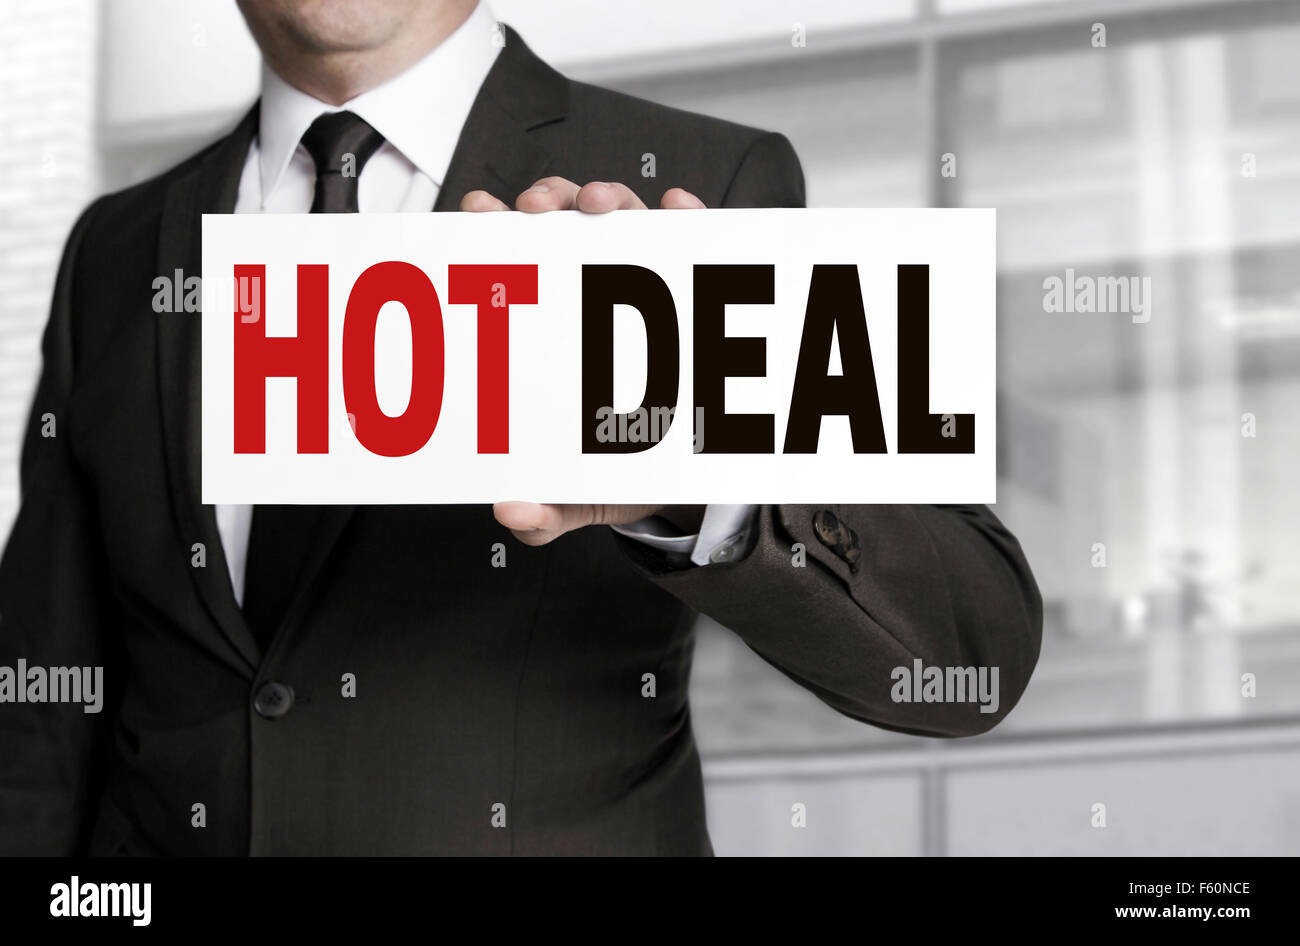 Hot Deal sign is held by businessman concept. Stock Photo